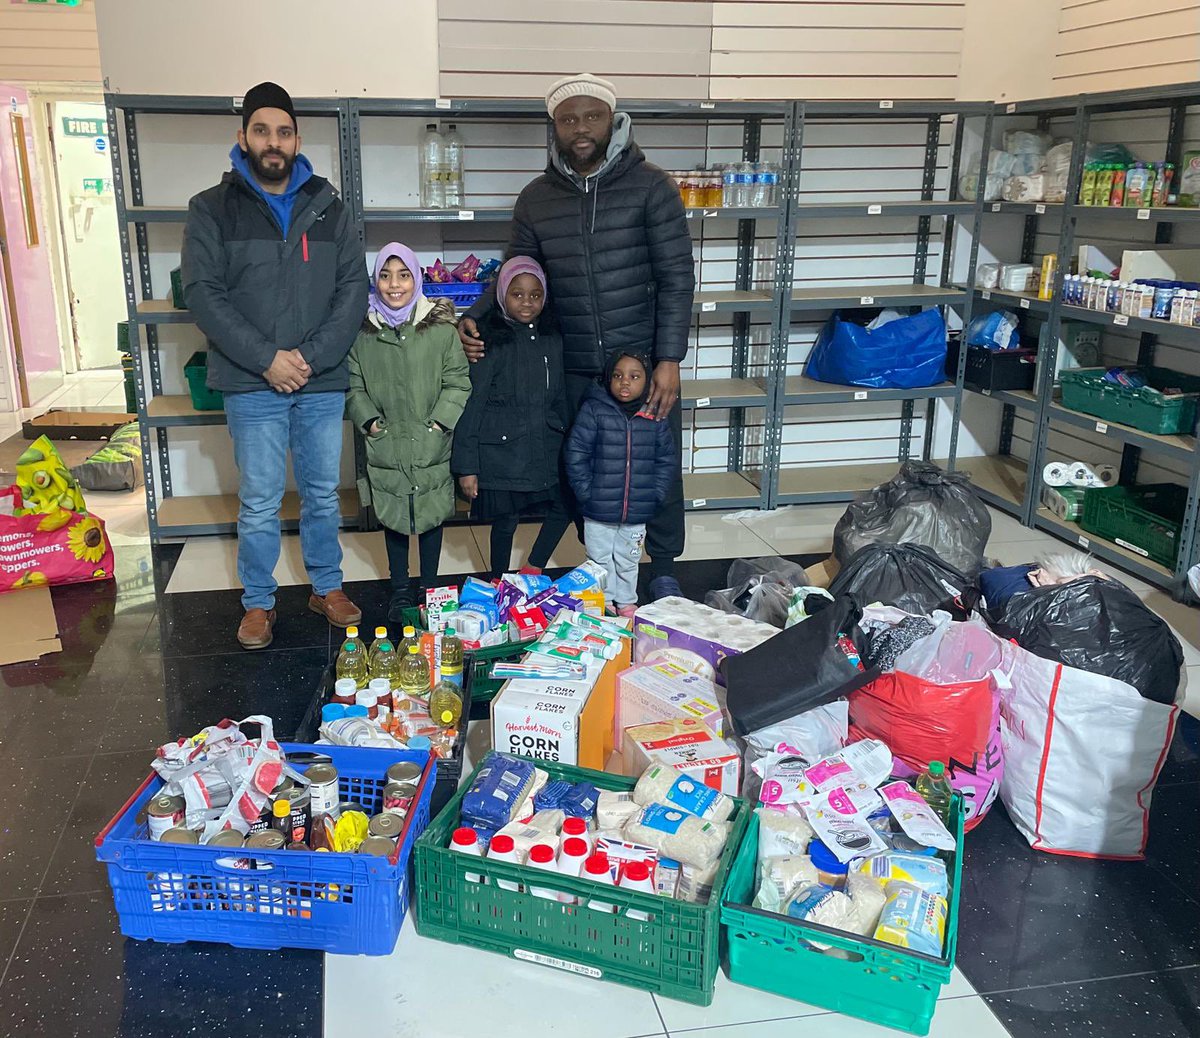 Members of the @amawolves helping the needy in these difficult times by donating to @walsall Foodbank Serving humanity is what our faith teaches us. @UKMuslimYouth @AMYA_Humanity @AMYA_WM